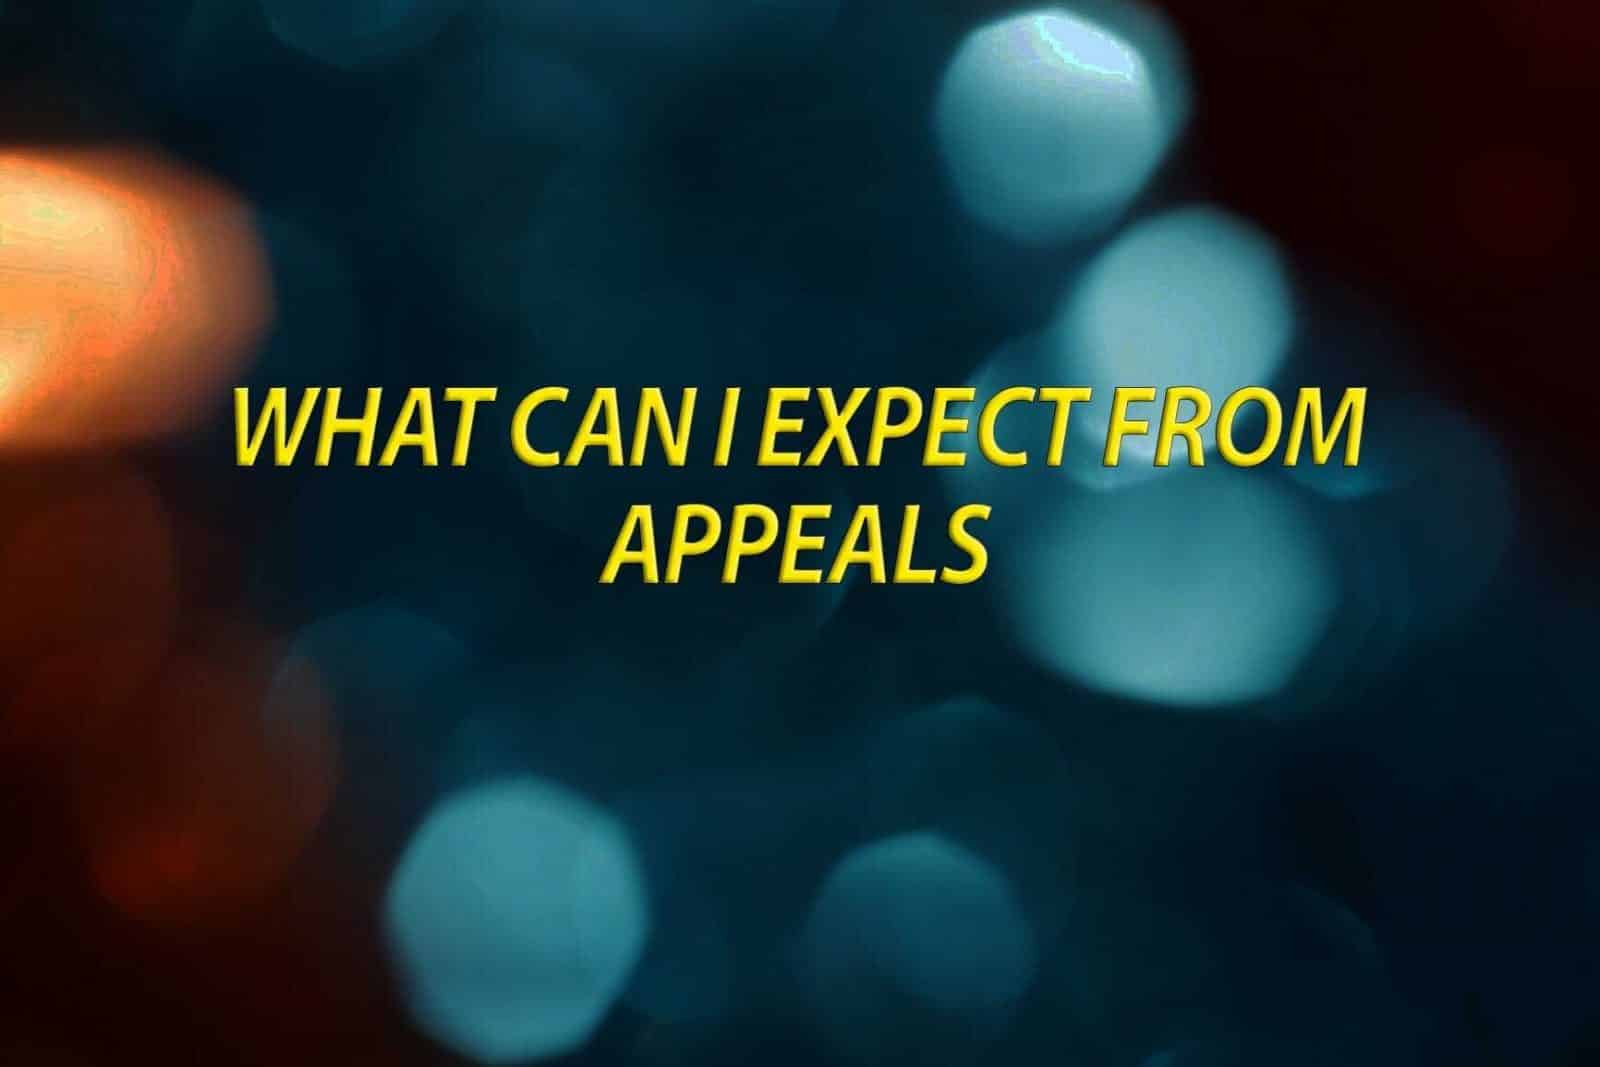 What can I expect from appeals